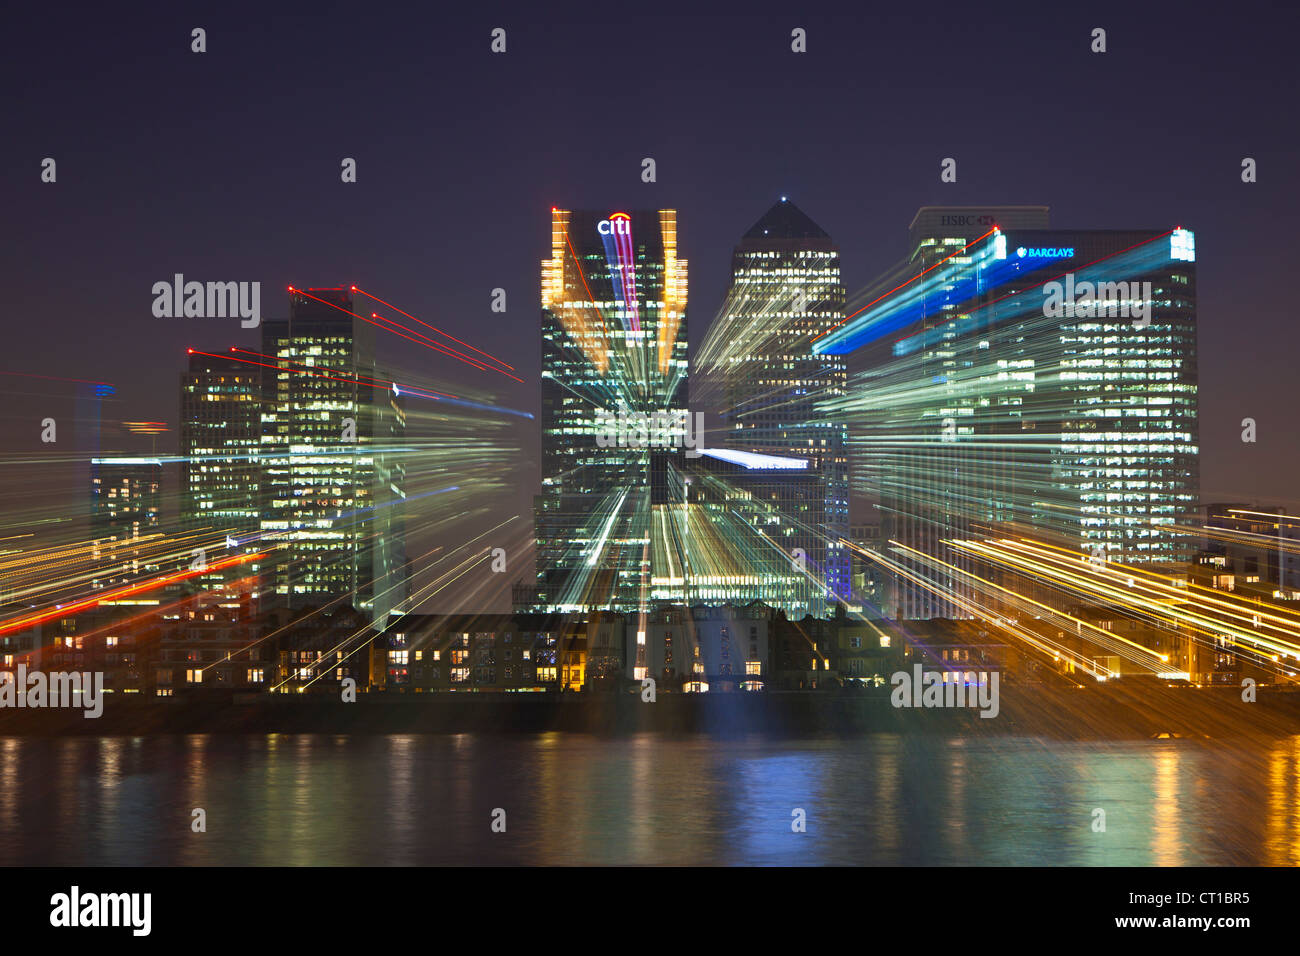 Canary Wharf financial district viewed over the river Thames with a zoom burst effect, London, UK Stock Photo